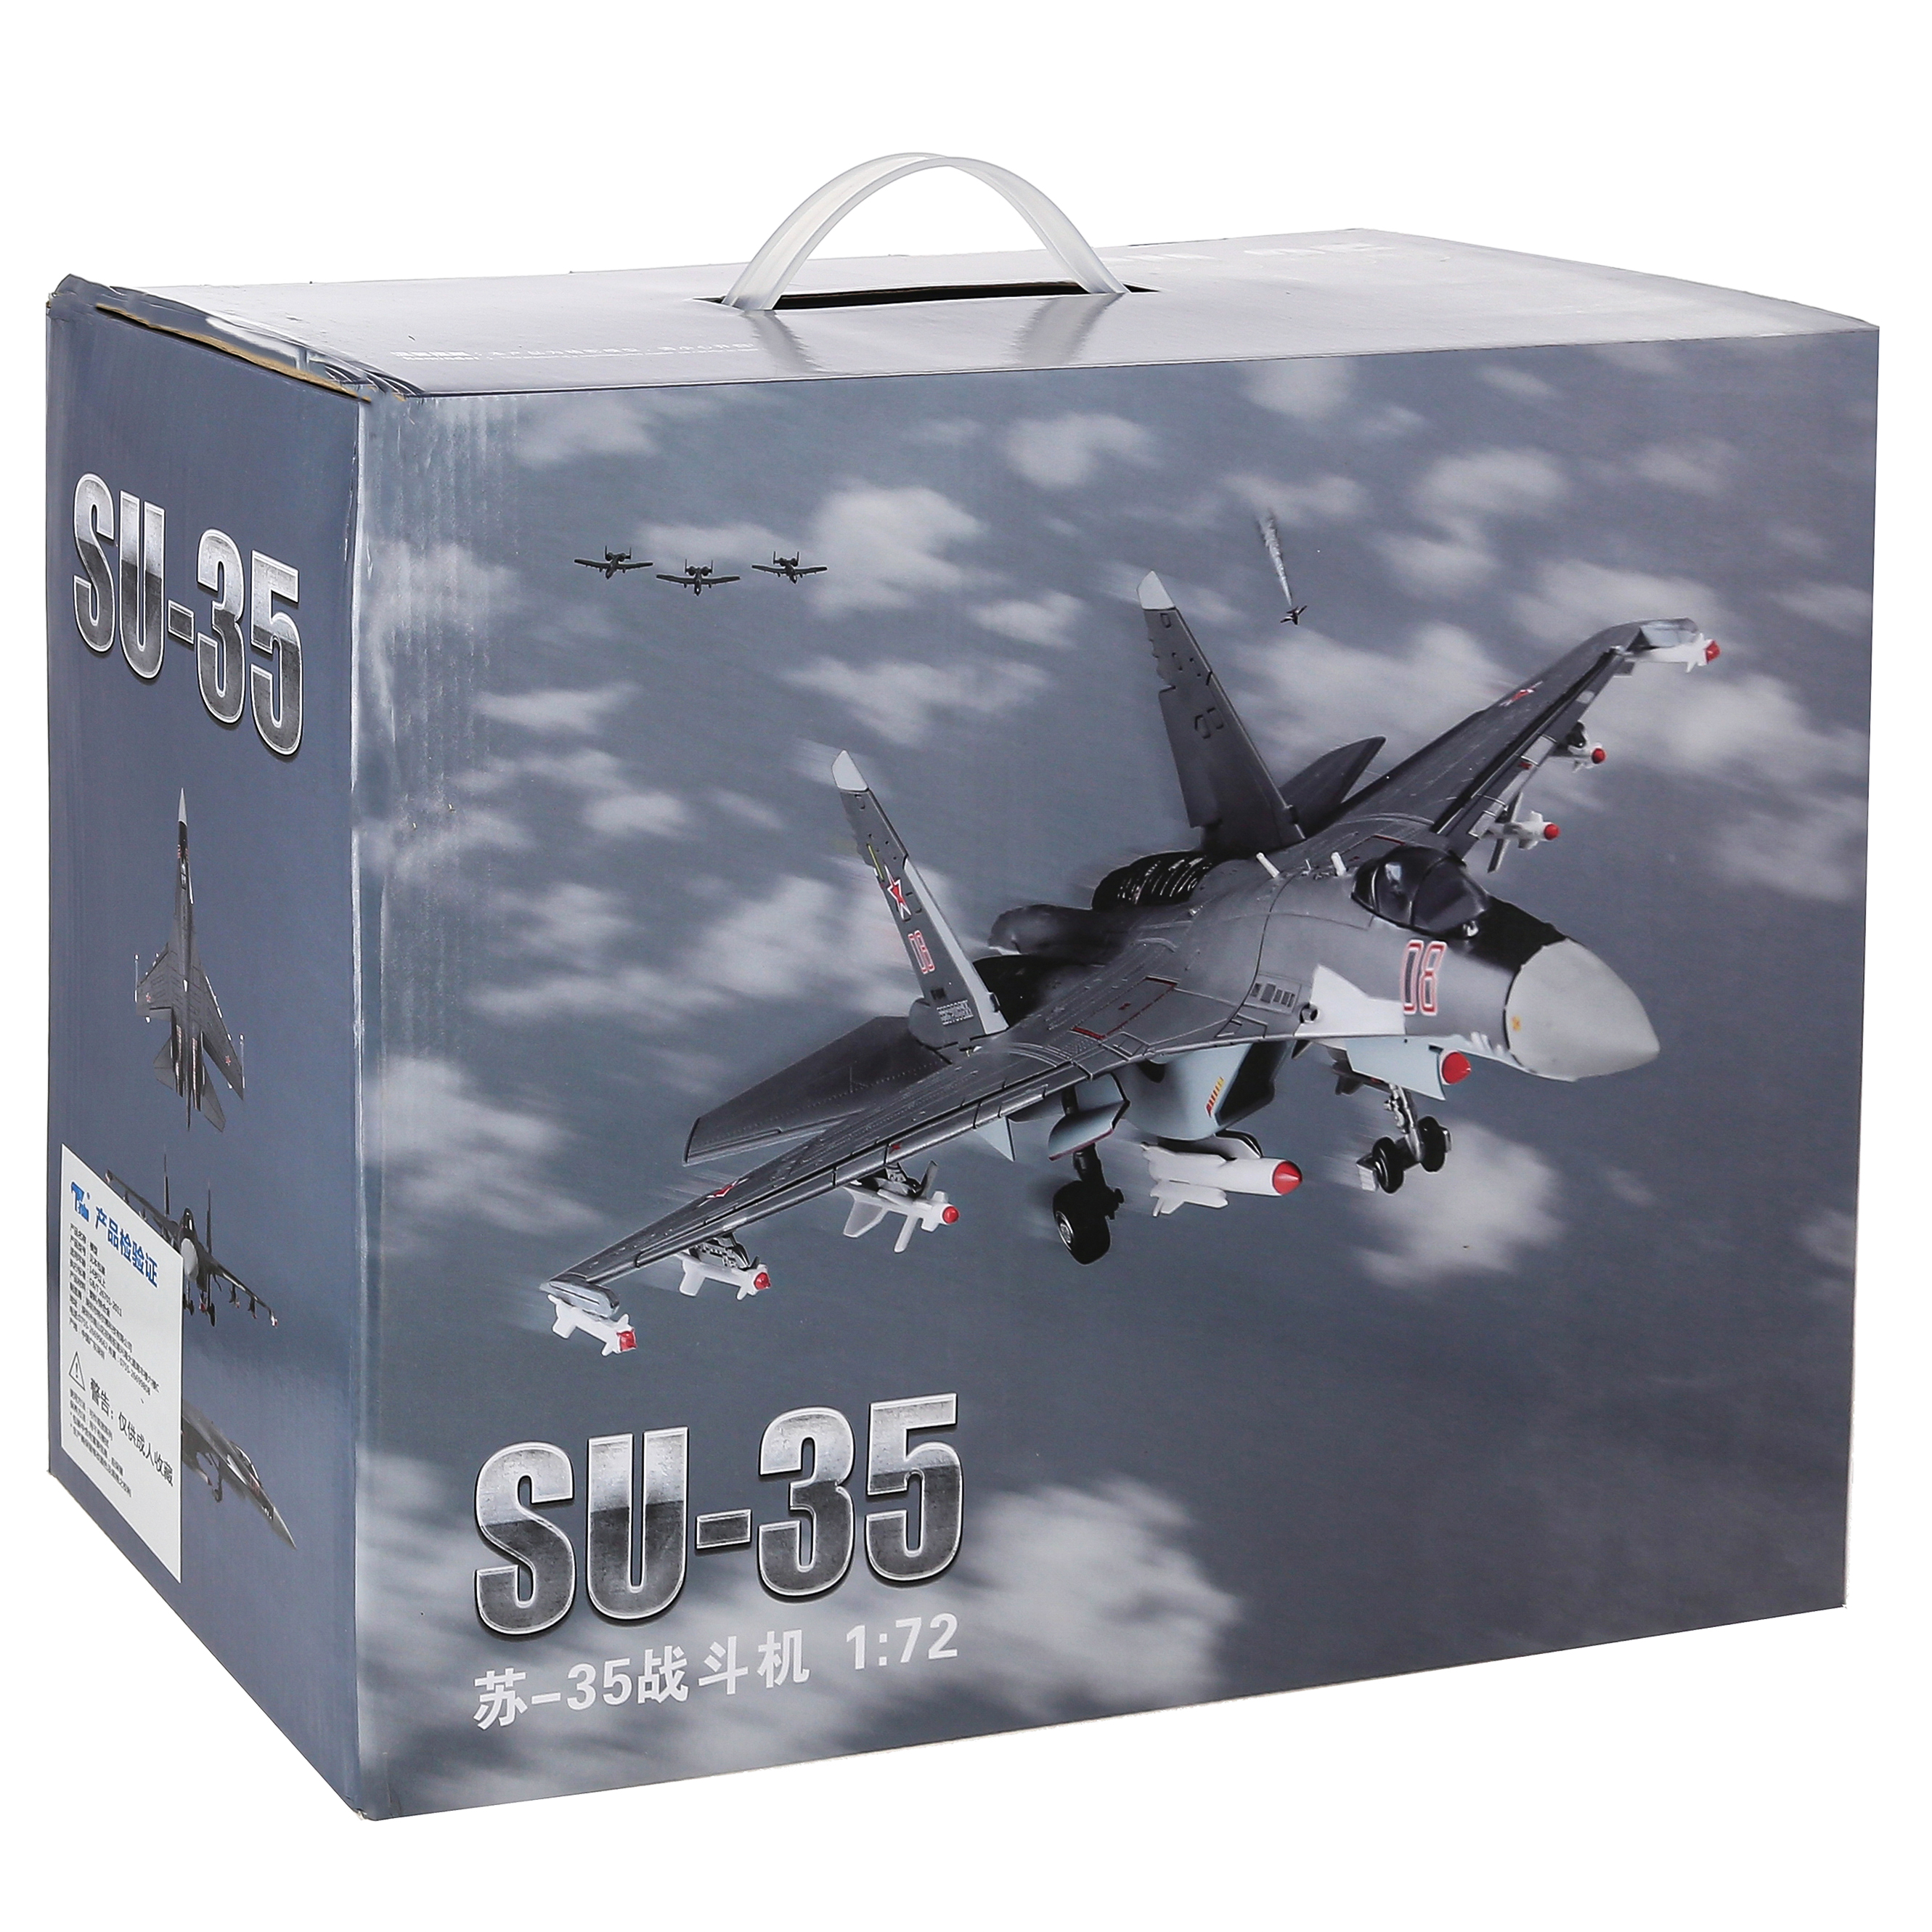    -35,  1:72 ,   32 . The model of the Russian Su-35 fighter, scale 1:72 metal, the length of the model is 32 cm. # 9 hobbyplus.ru